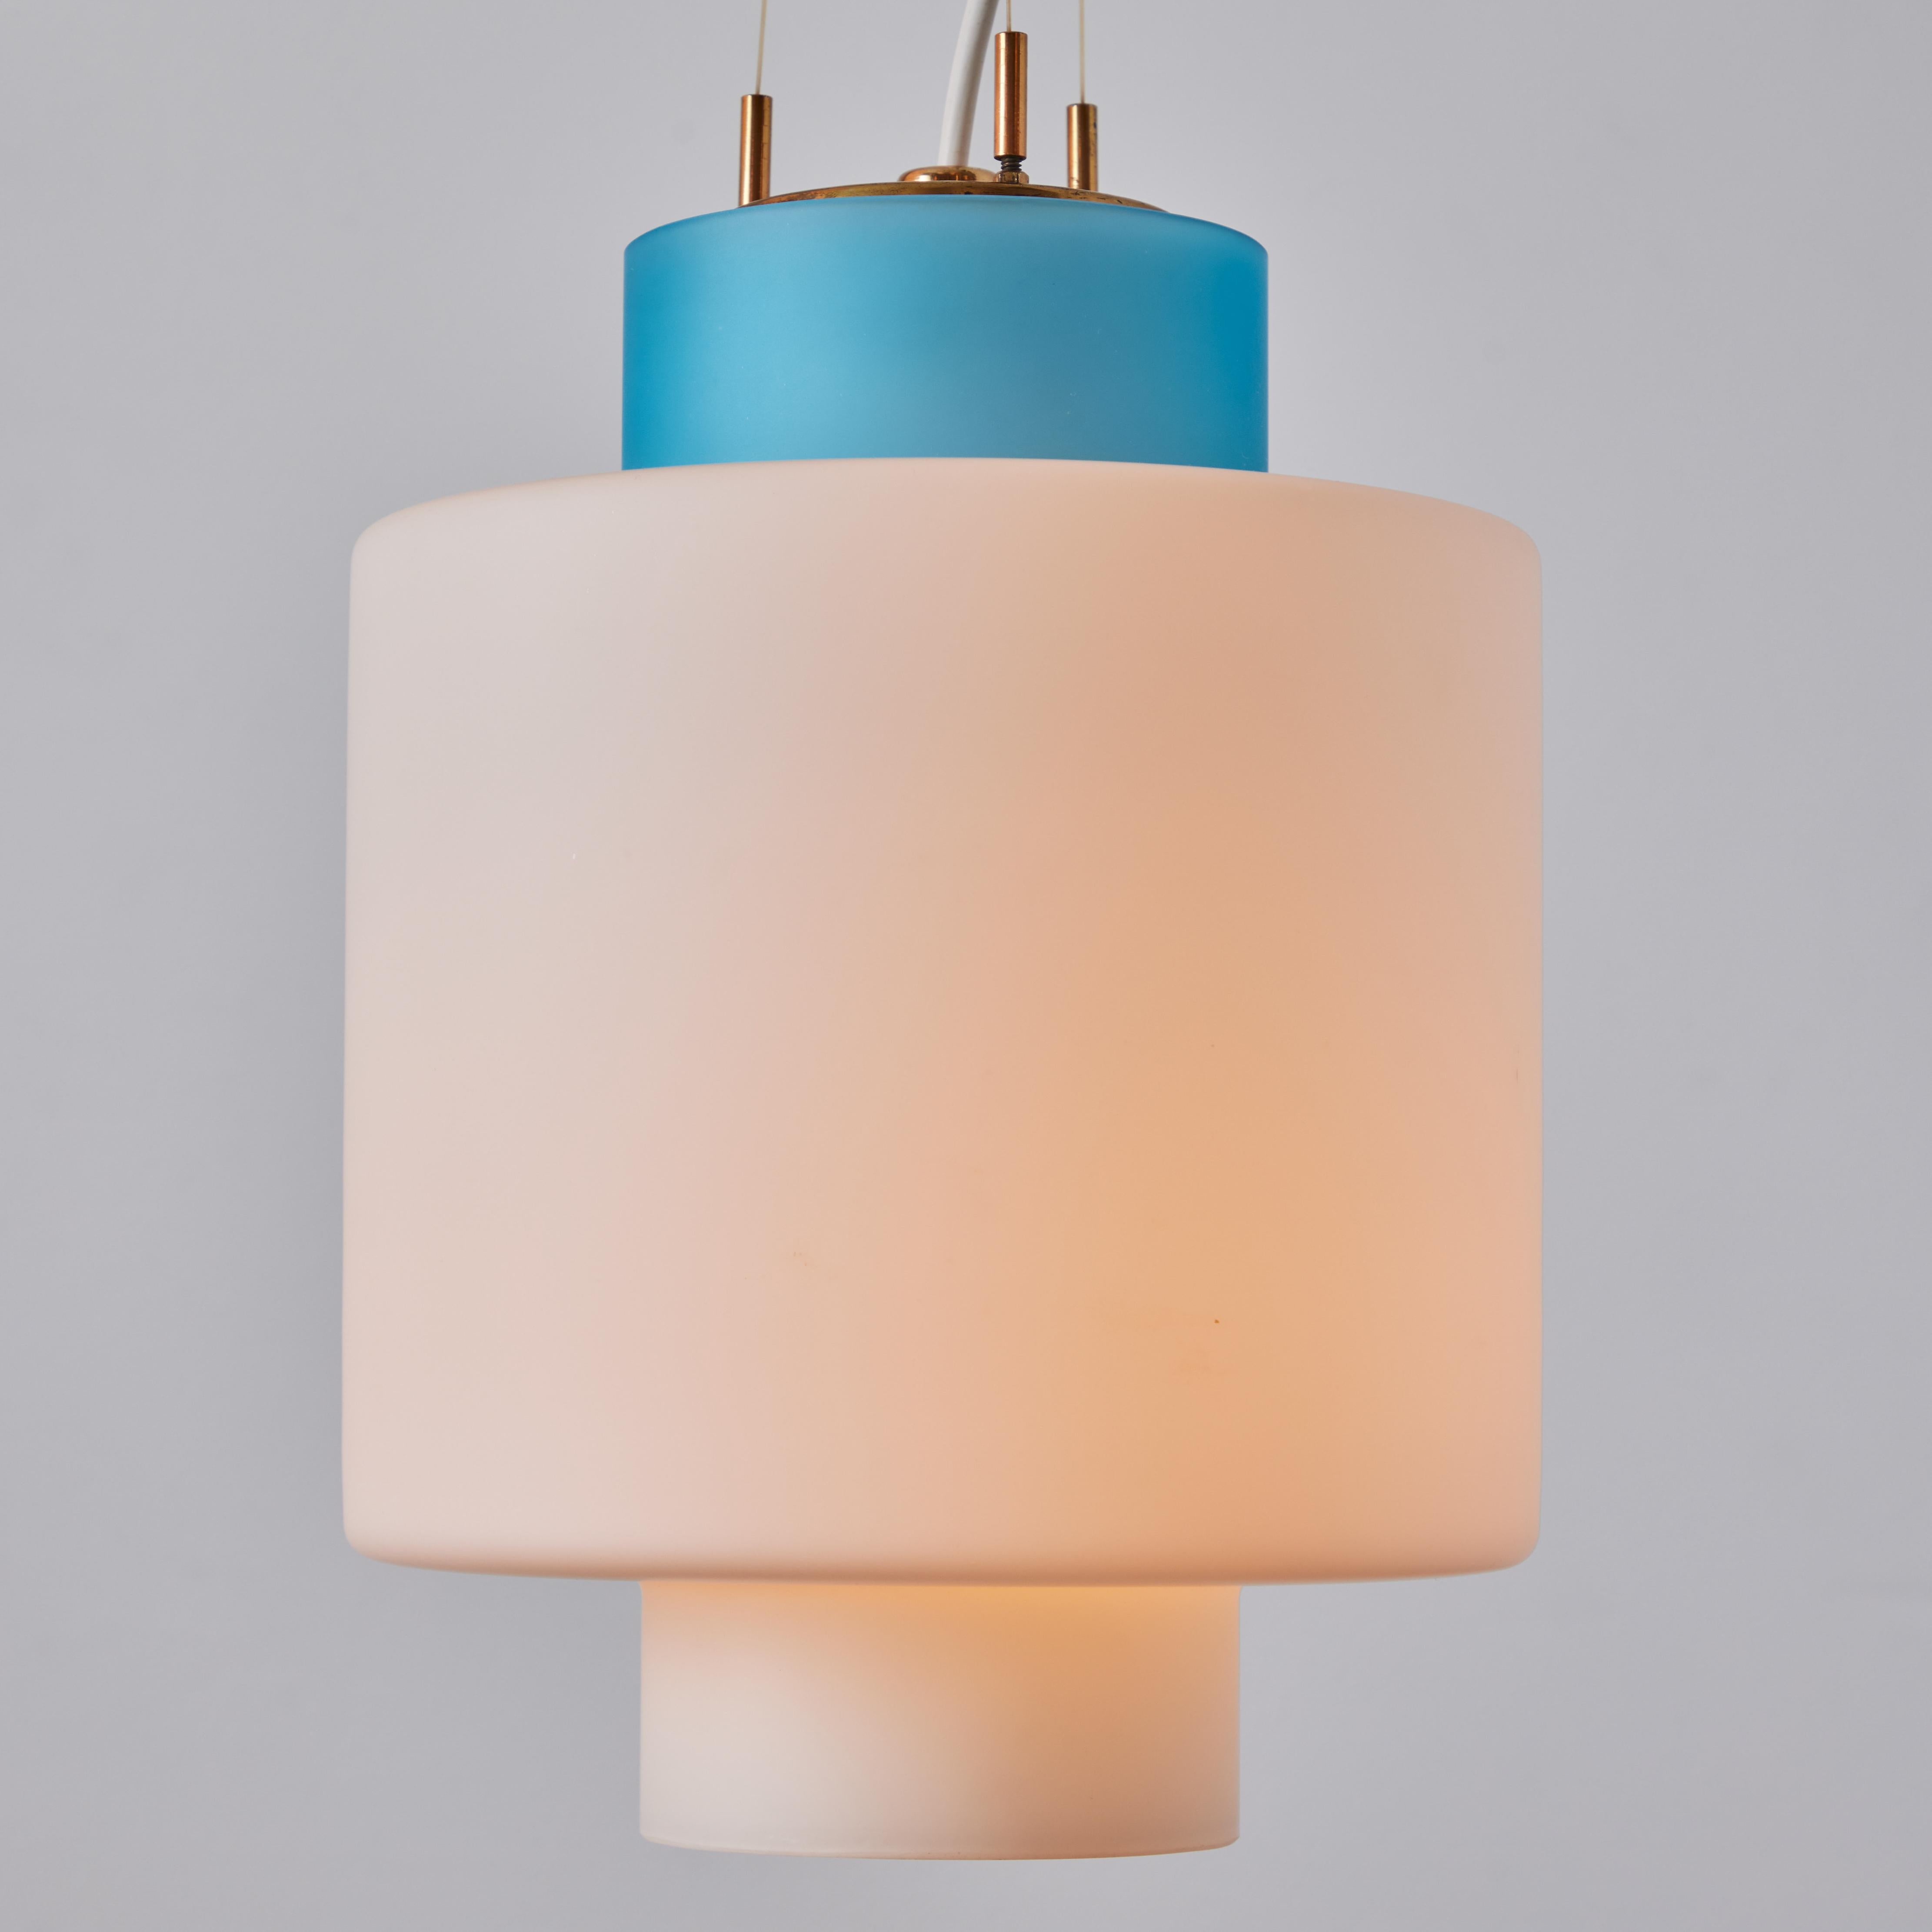 1950s Stilnovo Two-Pendant Blue and White Opaline Glass Suspension Lamp In Good Condition For Sale In Glendale, CA